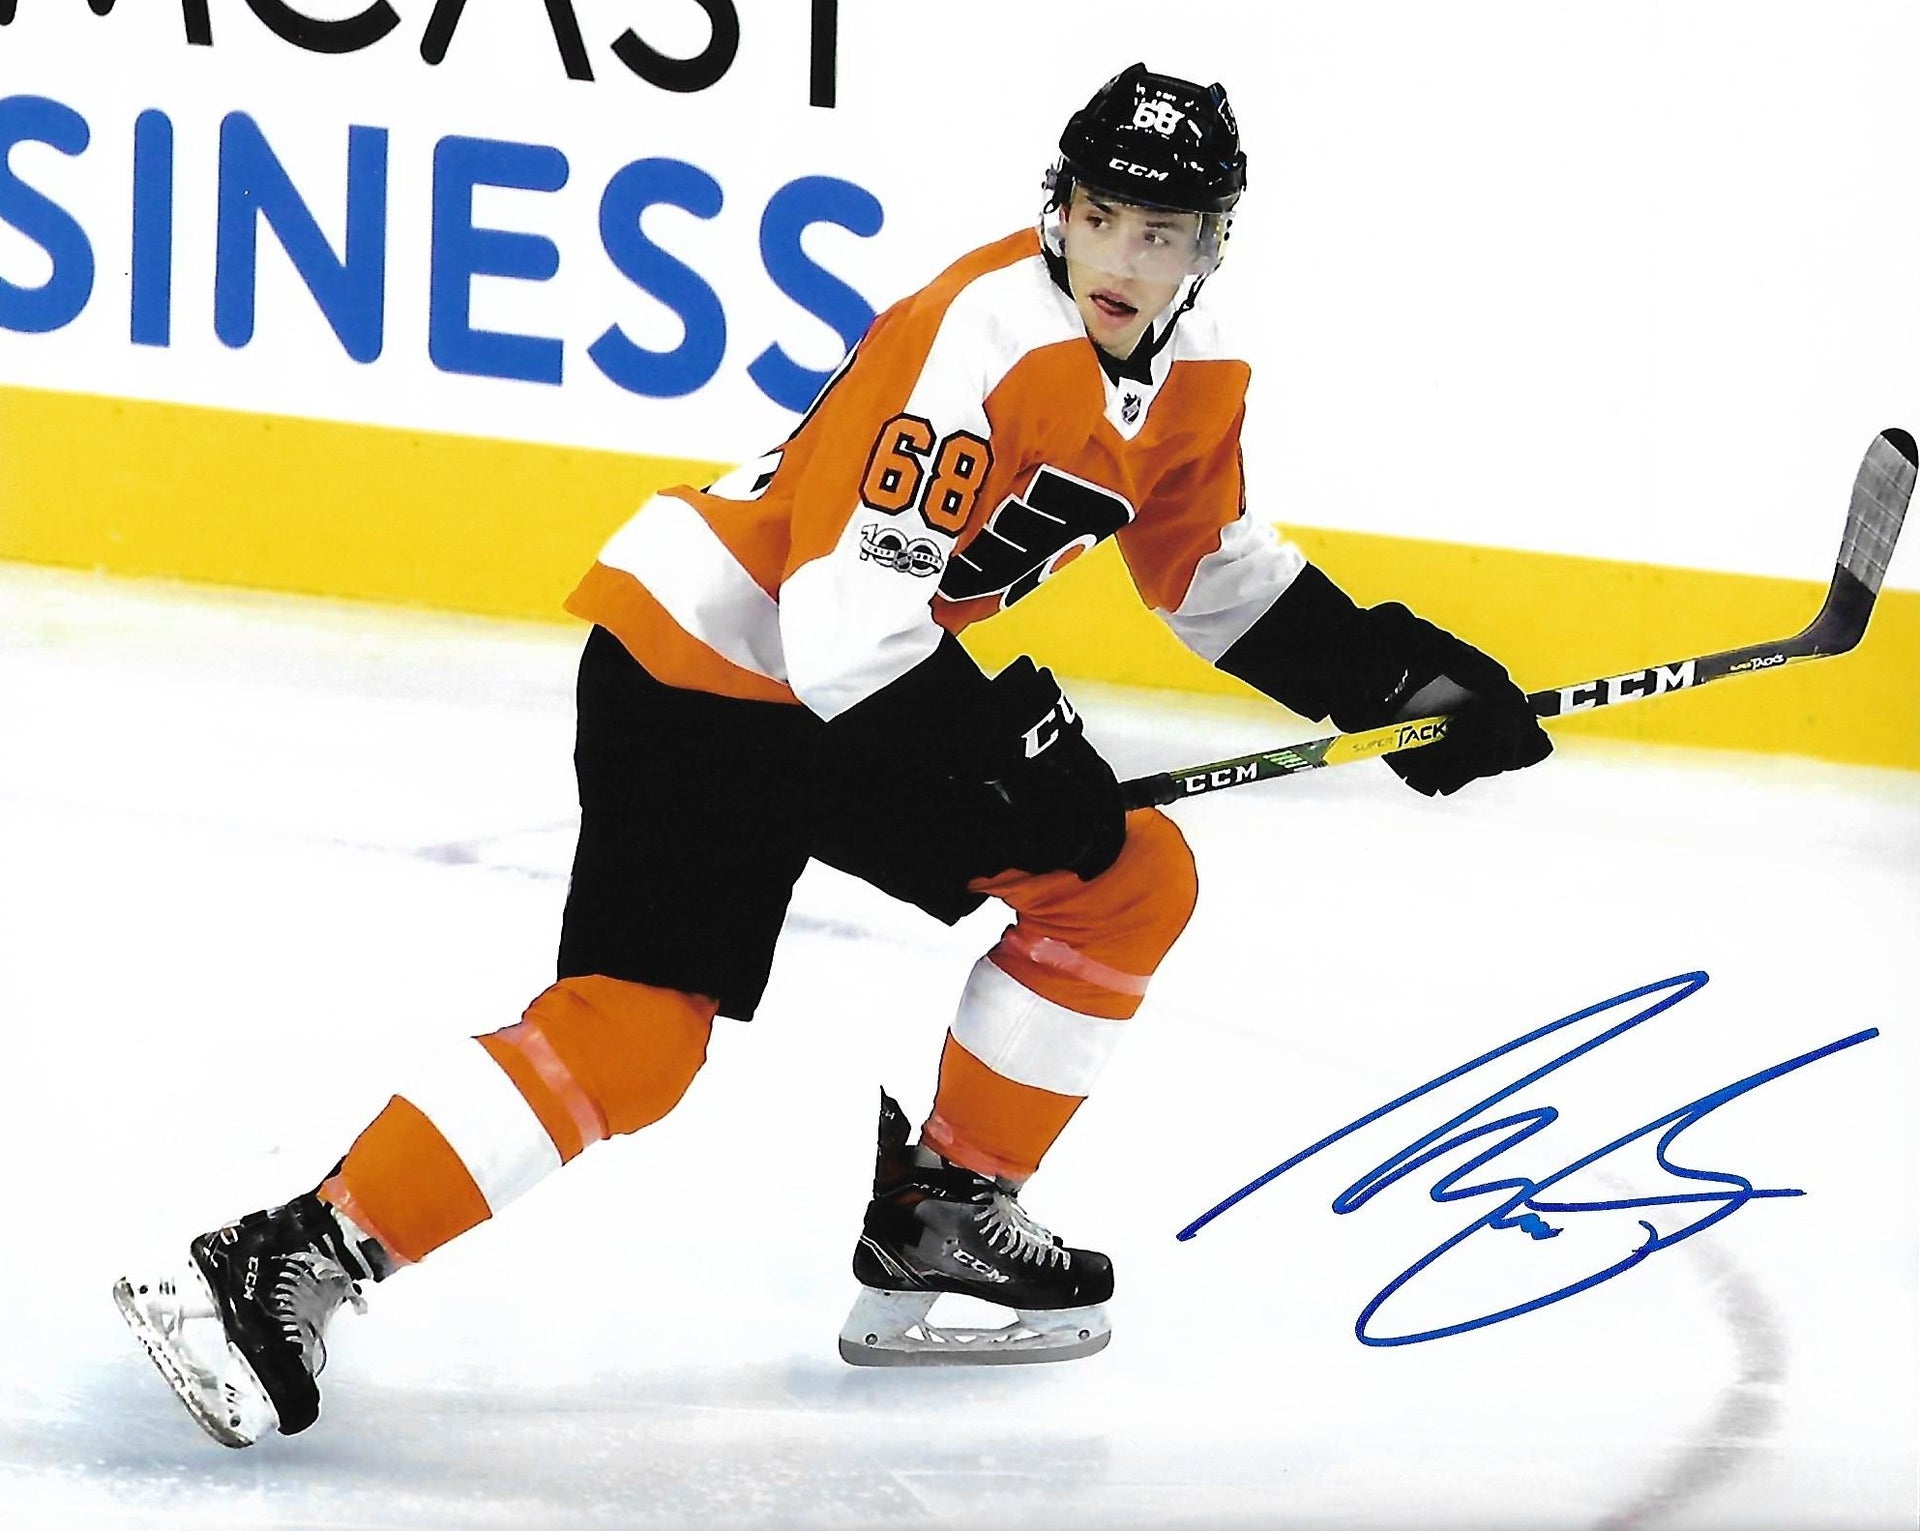 Morgan Frost in Action Autographed Philadelphia Flyers Hockey Photo - Dynasty Sports & Framing 